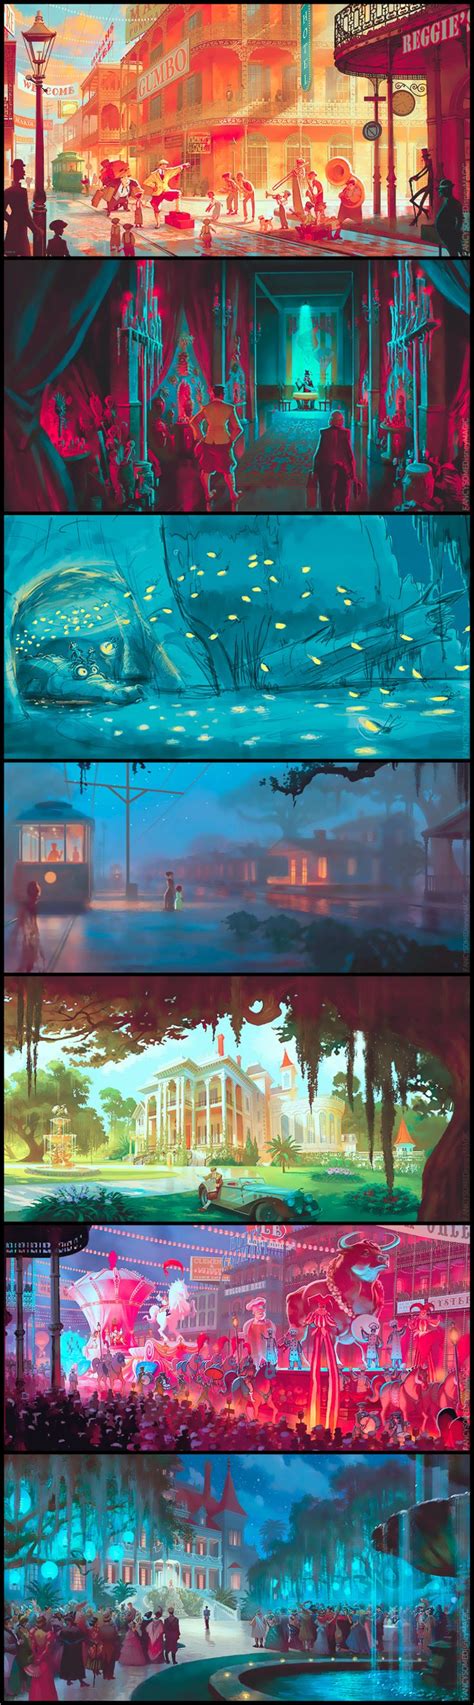 The Princess And The Frog Concept Art Illustration Vector